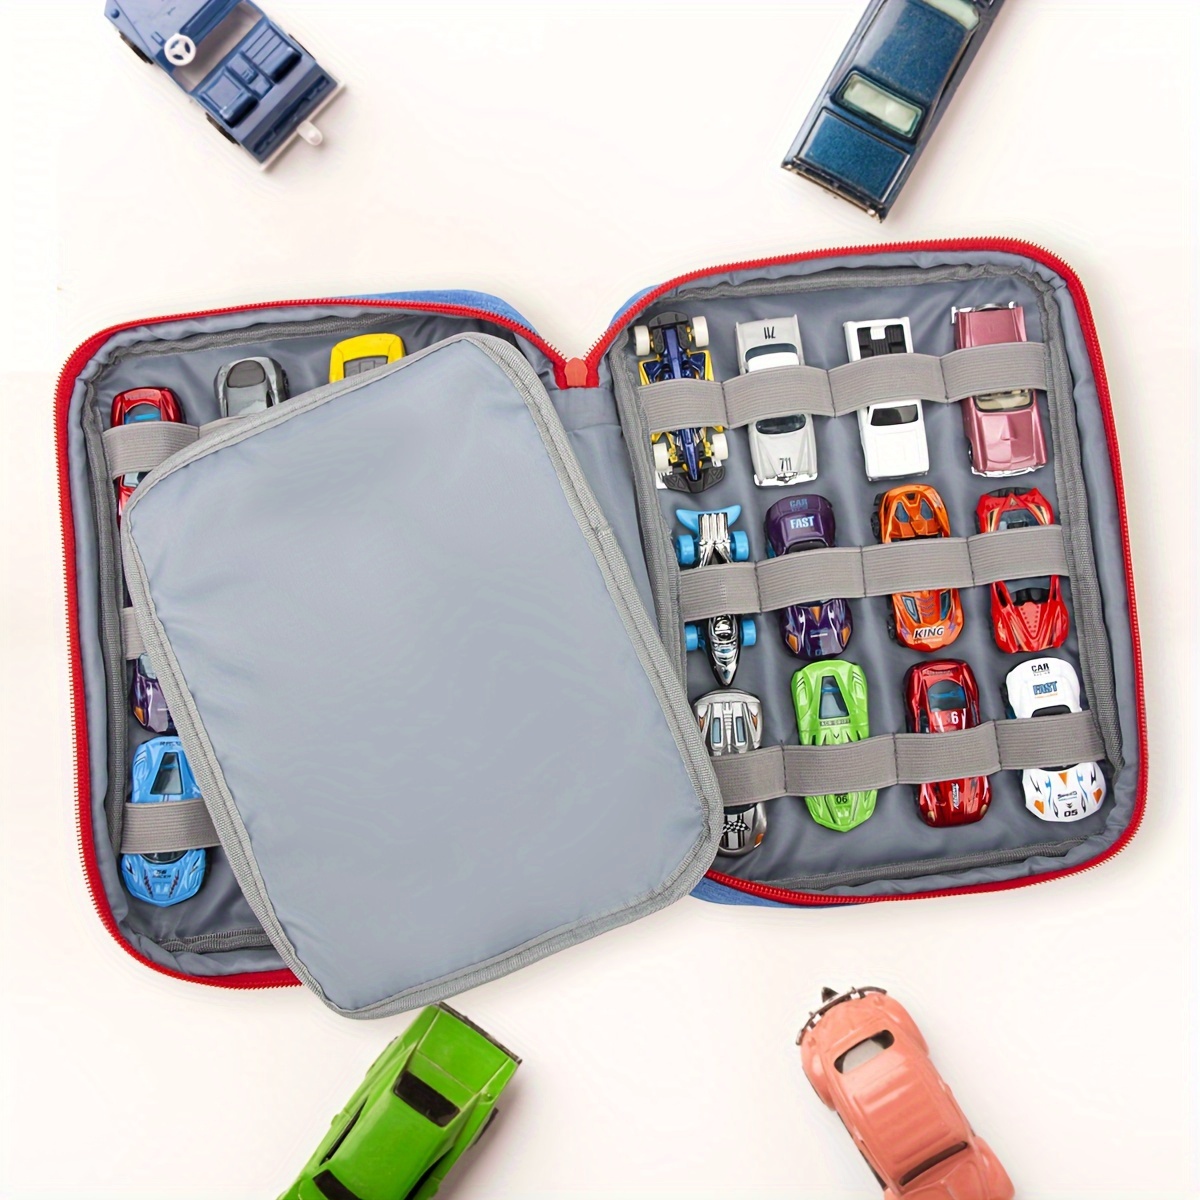 Hot Wheels: 48 Cart Storage Case, Easy Grip Carrying Case, Makes Collecting  and Clean Up Easy and Fun, Styles in Case May Vary, For Ages 3 and up